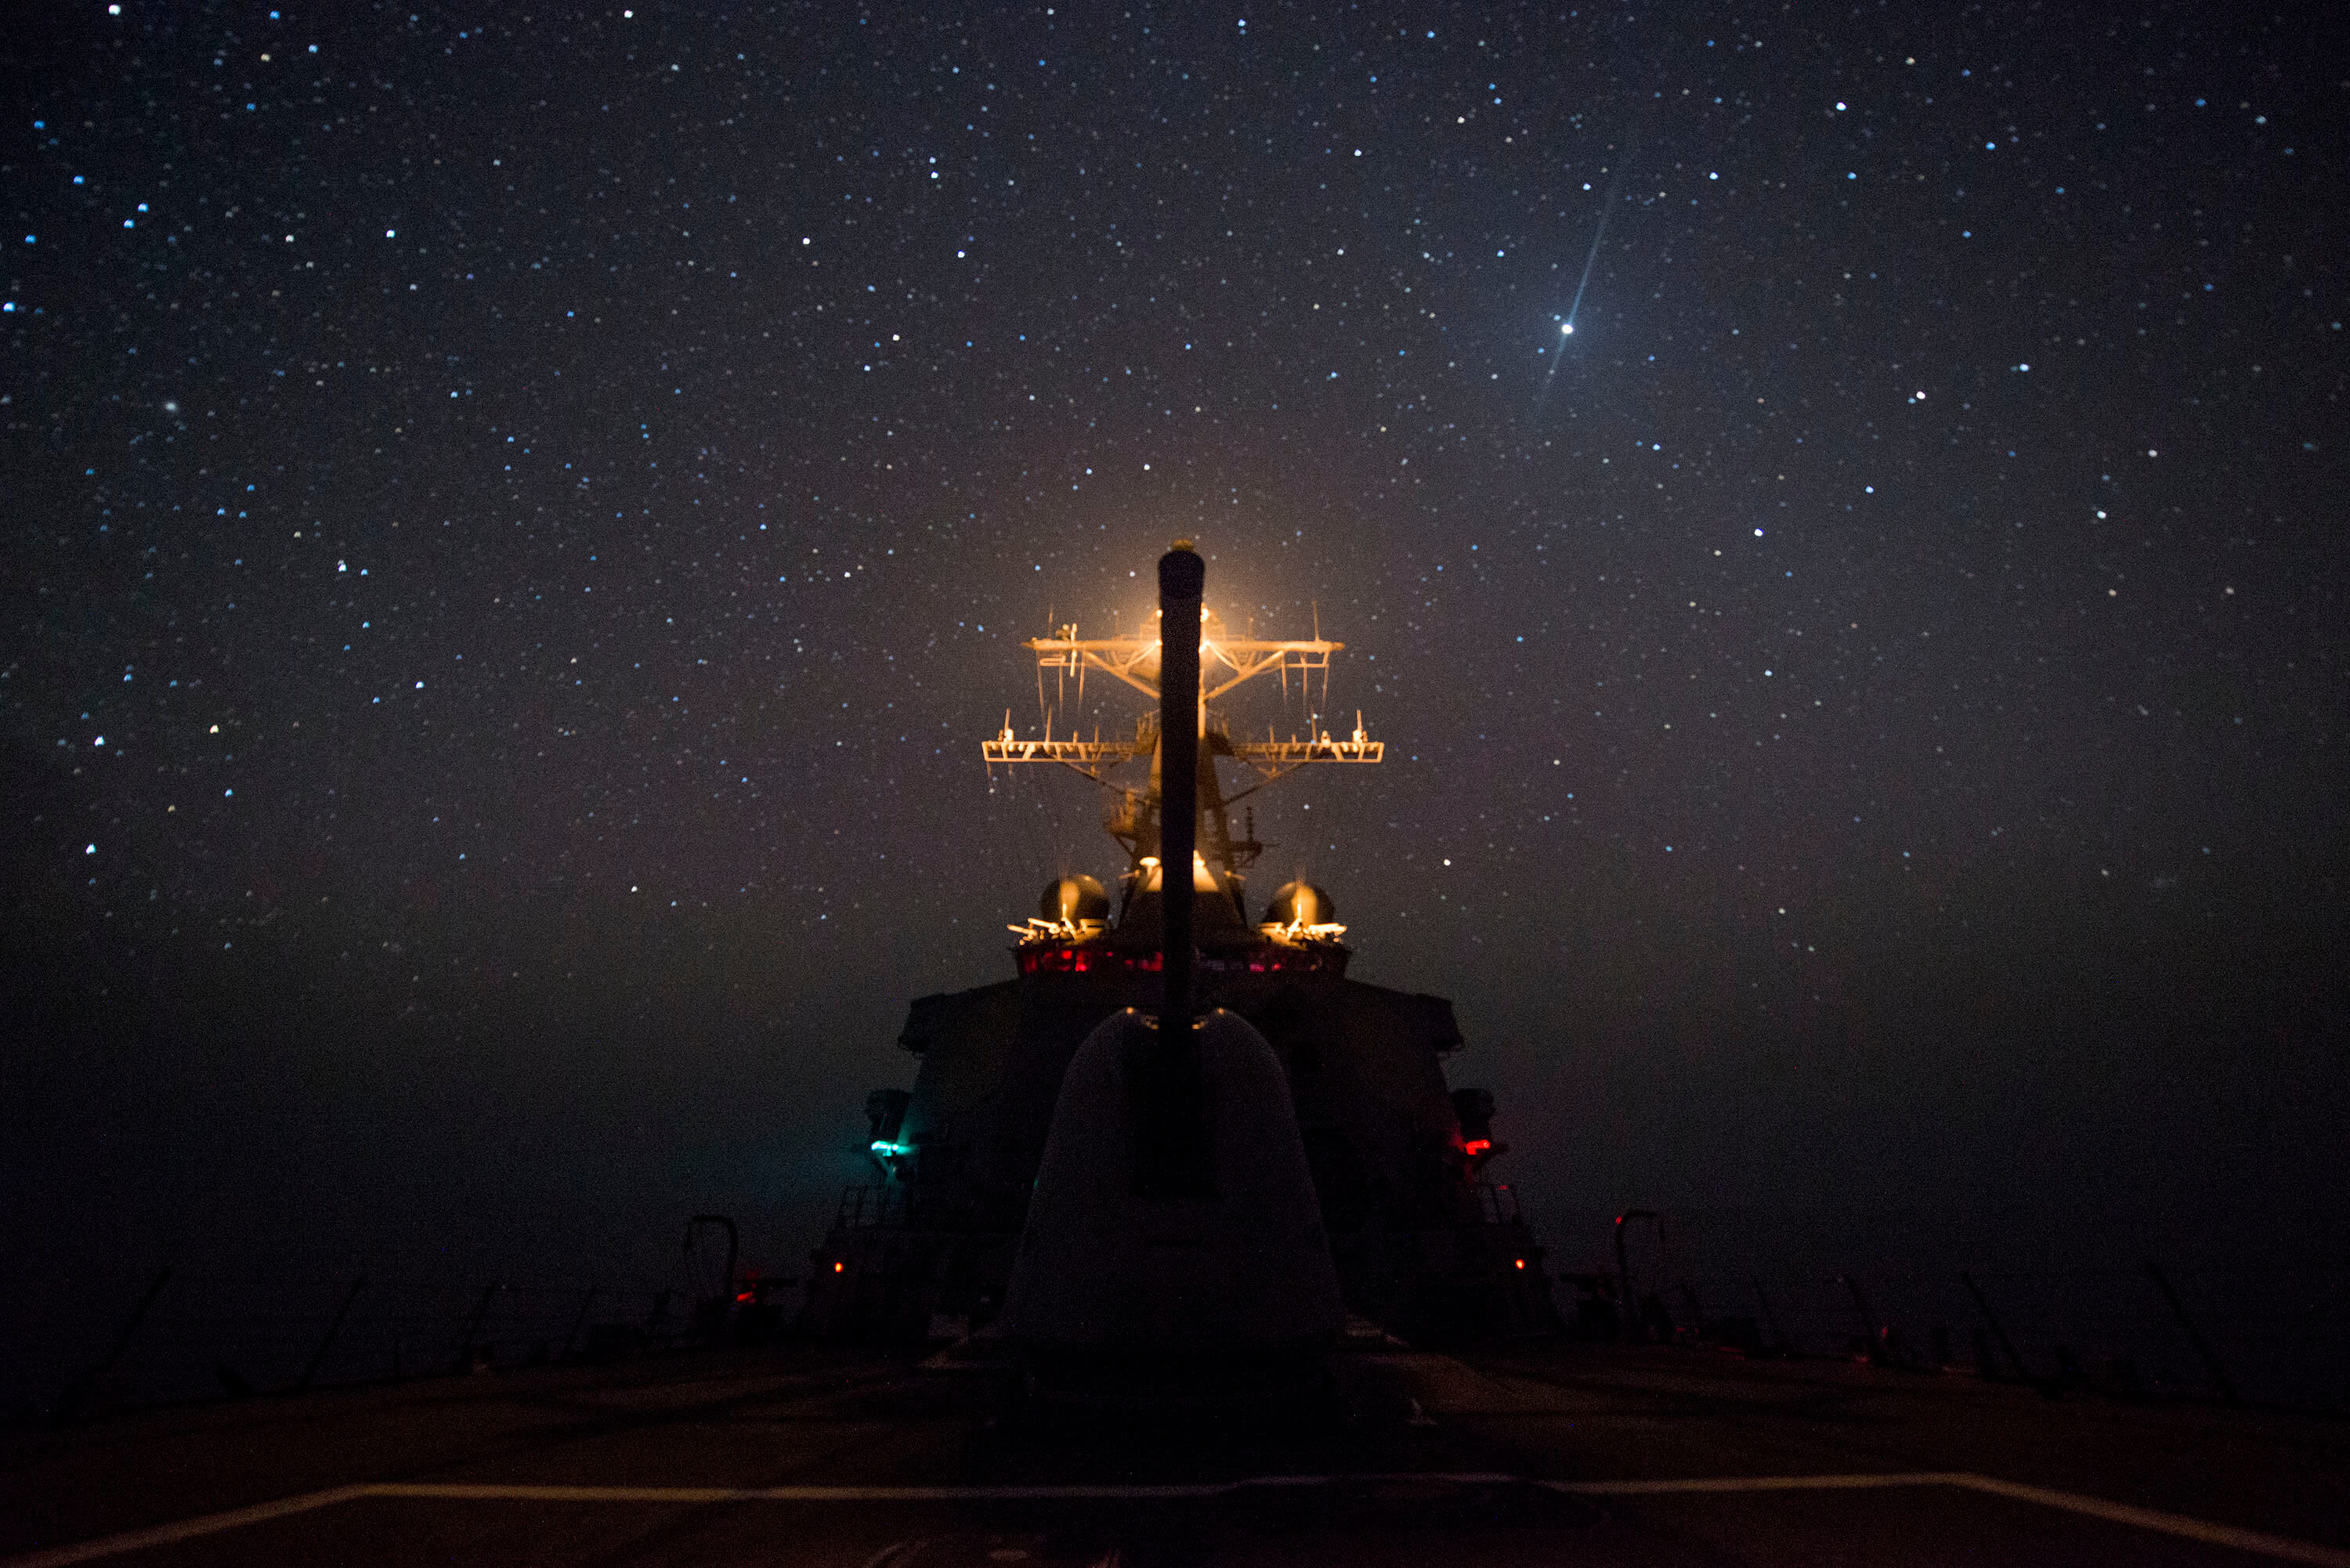 Guided-missile destroyer USS Gonzalez transits the Gulf of Aden in 2016 in support of Operation Inherent Resolve - Official U.S. Navy Page